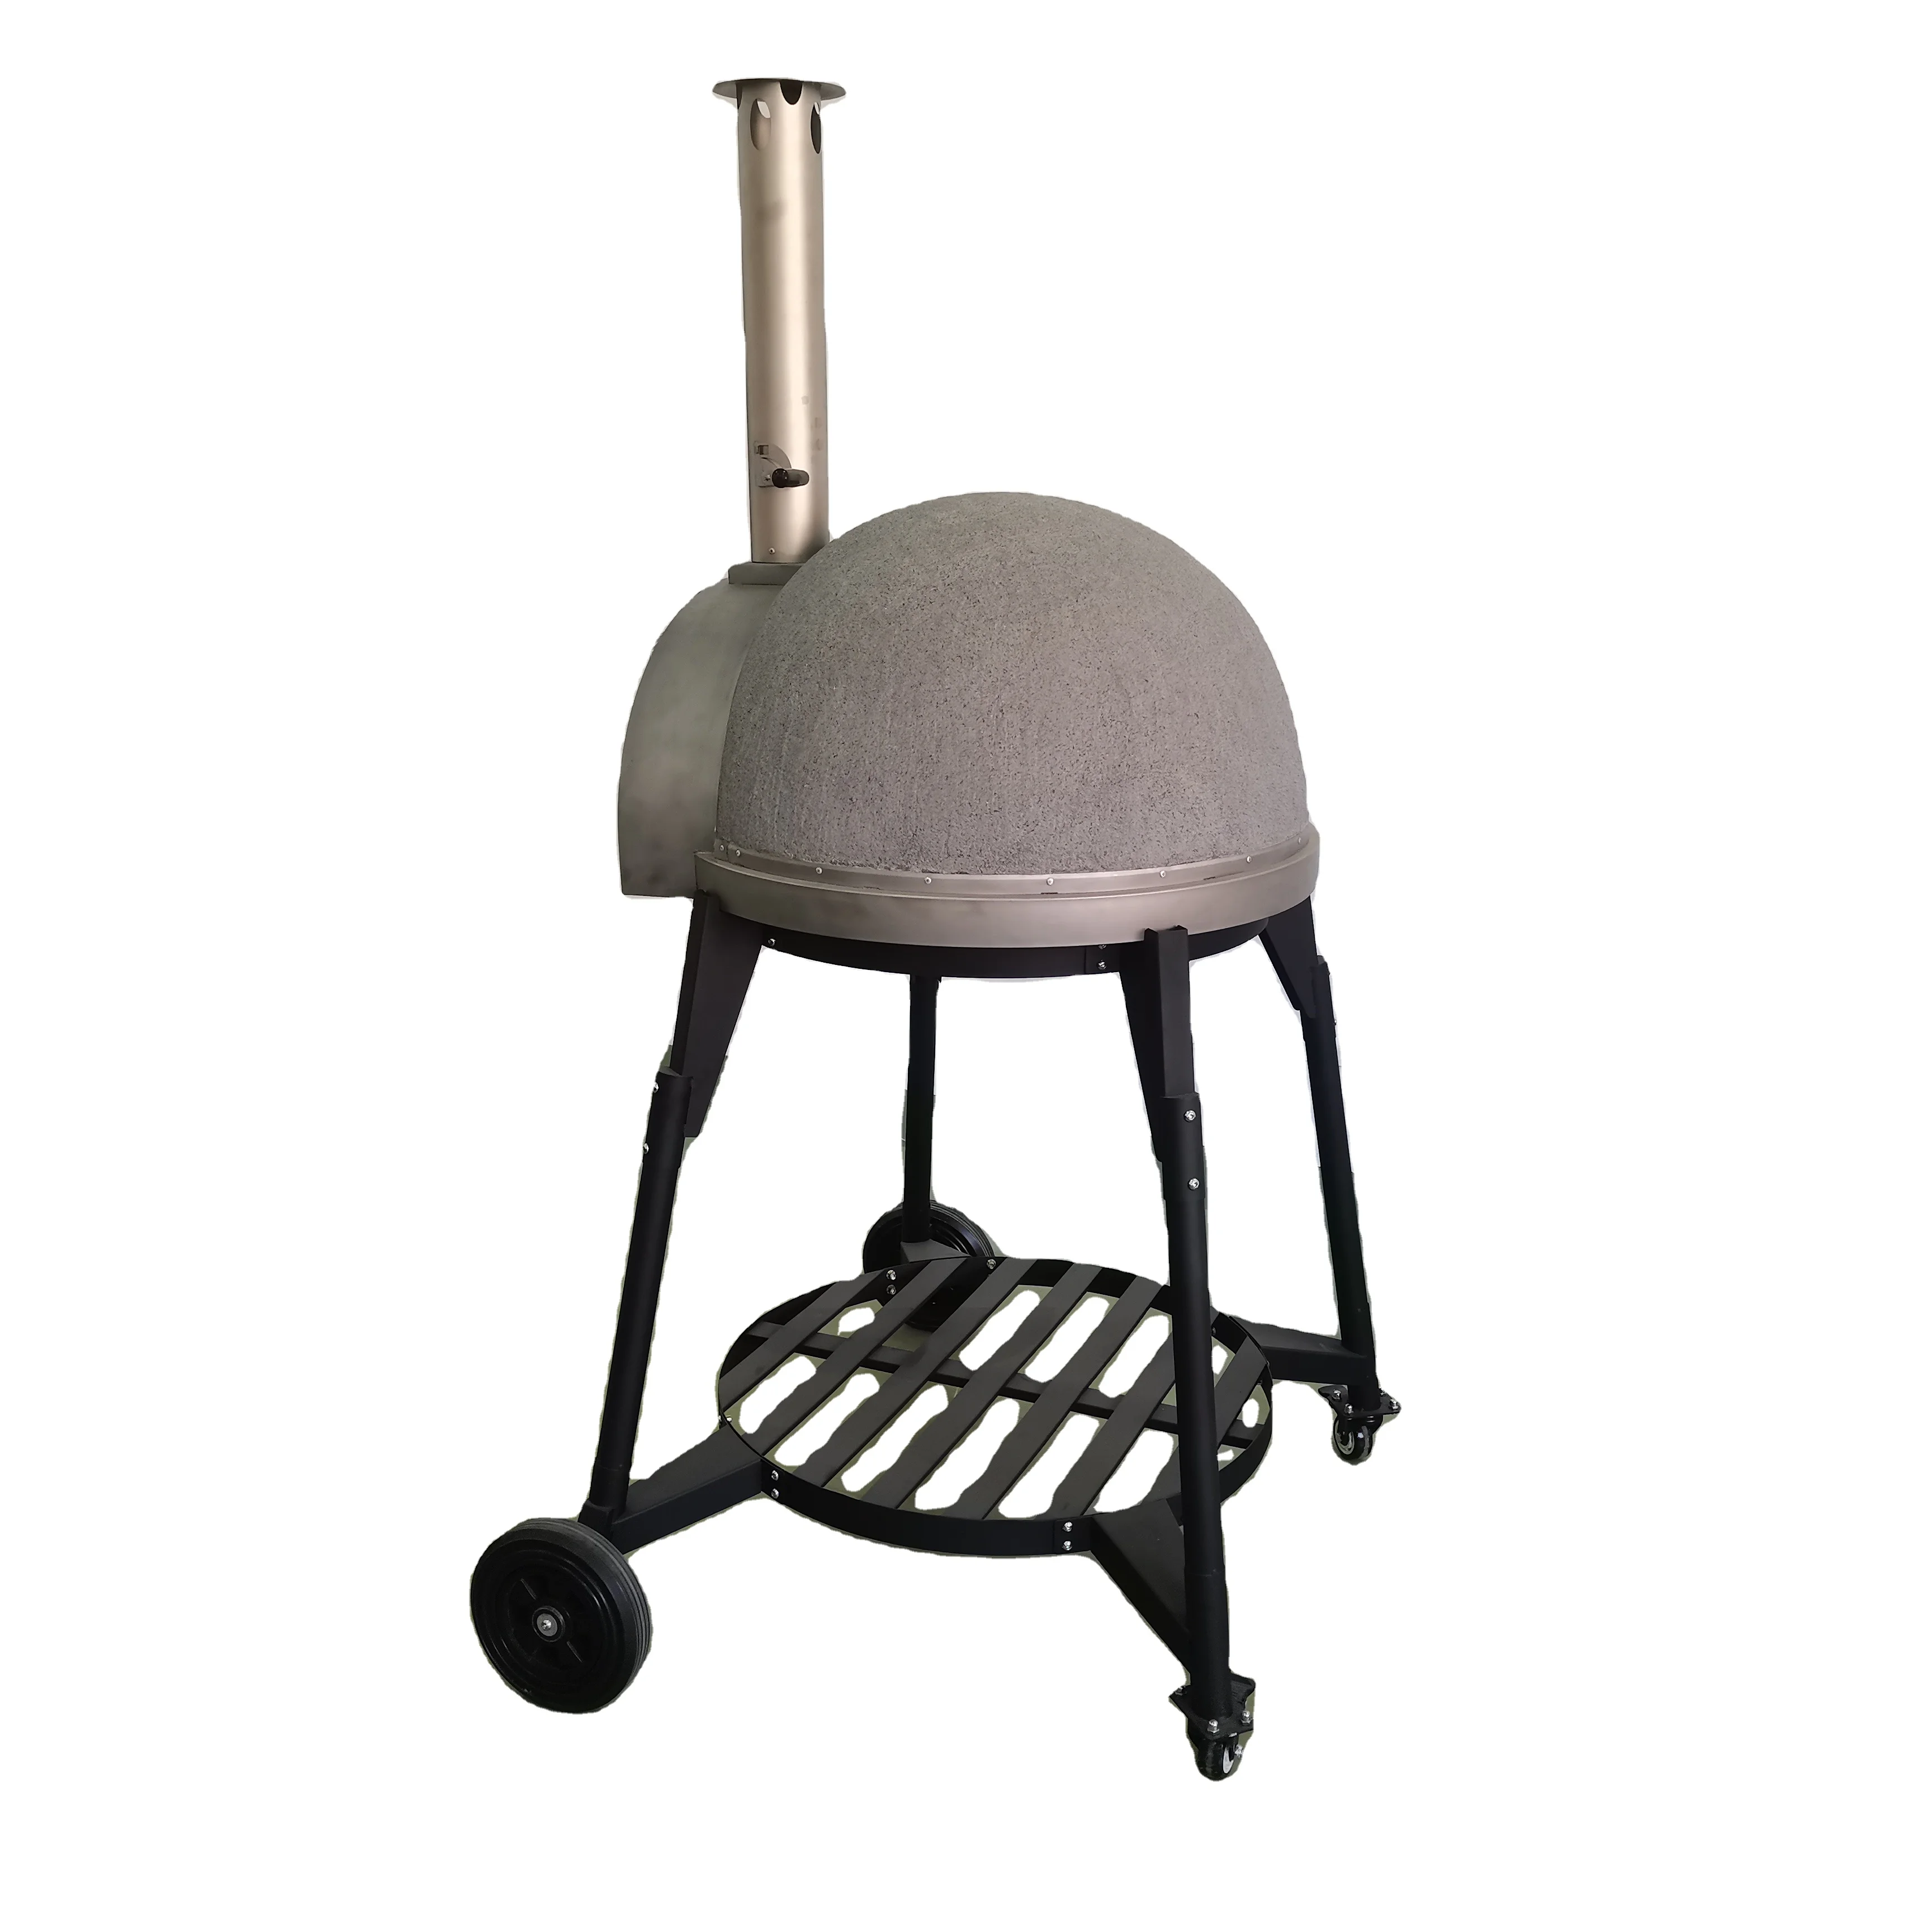 

Pizza oven size 600cm model NL608D outdoor clay brick pizza oven wood Brazil Promotion